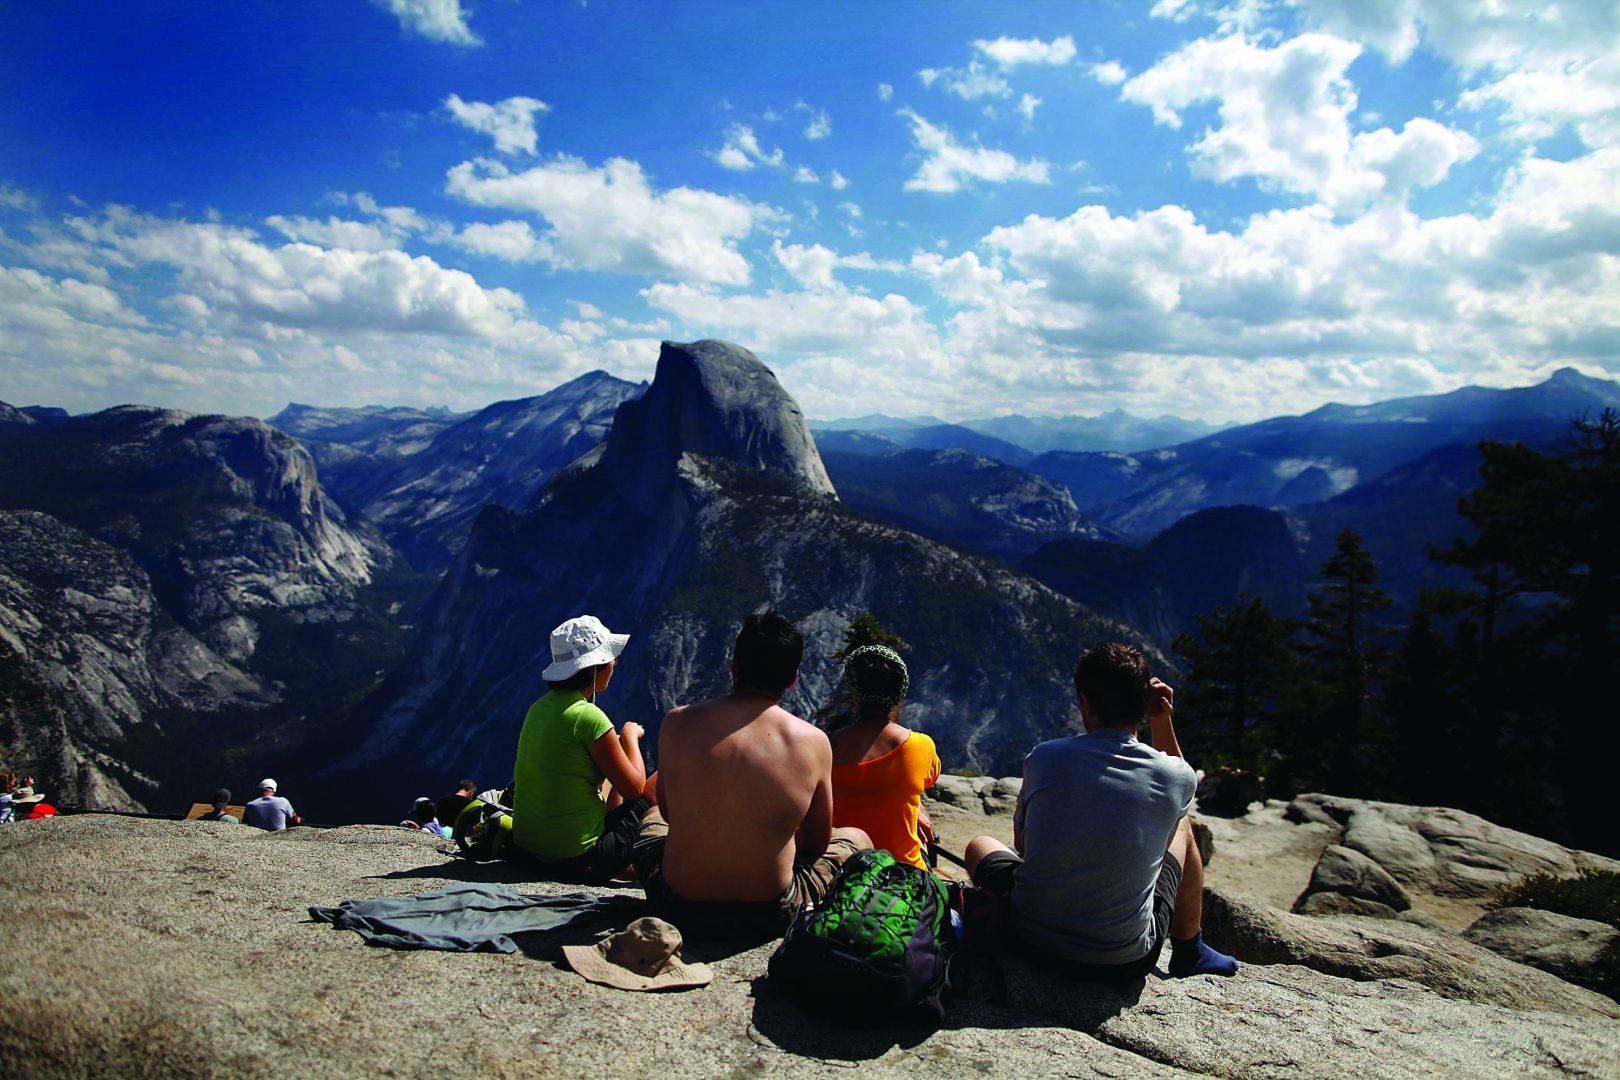 (Barbara Davidson/Los Angeles Times/TNS)
Tourists enjoy the view at Glacier Point in California’s Yosemite National Park.